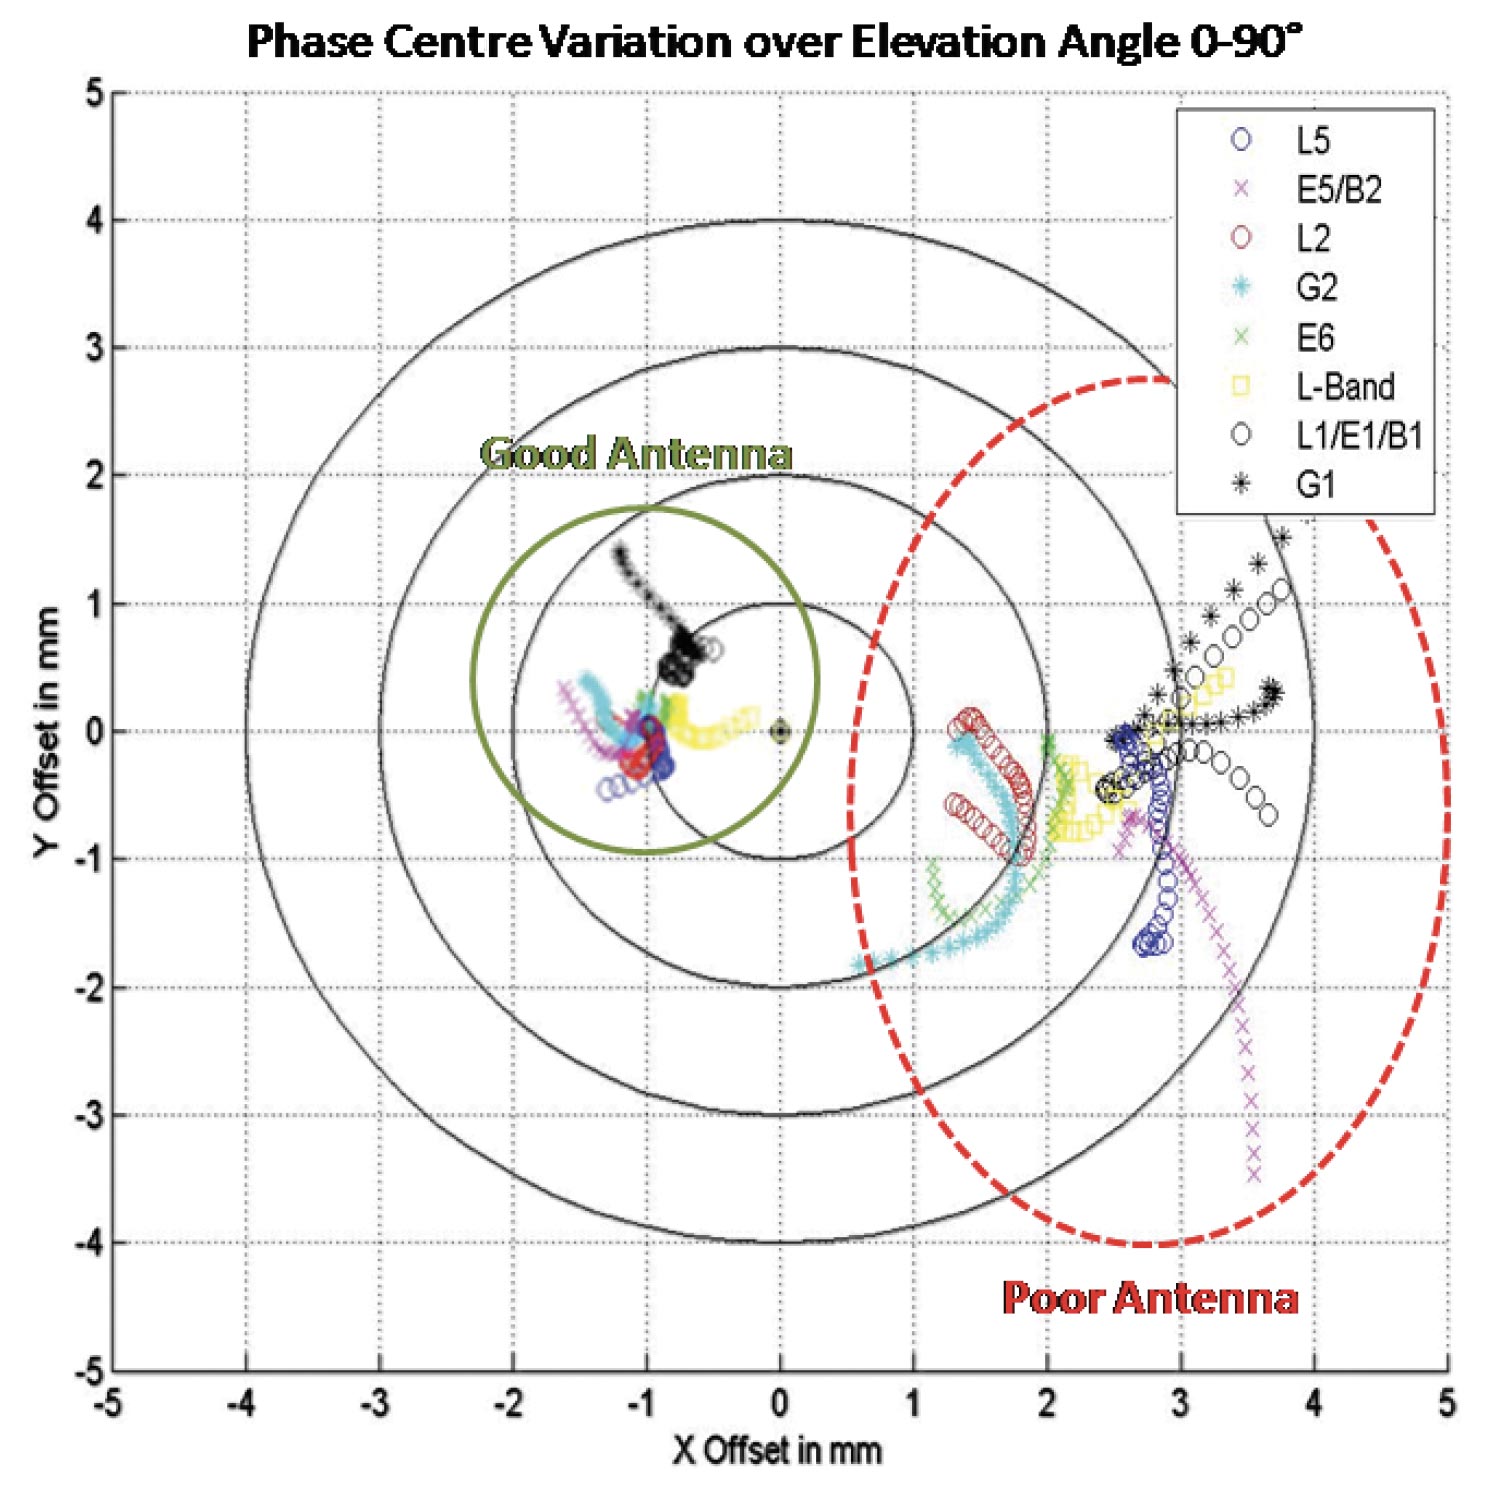 Figure 19 Plot of good and poor antenna phase centre variation over elevation angle